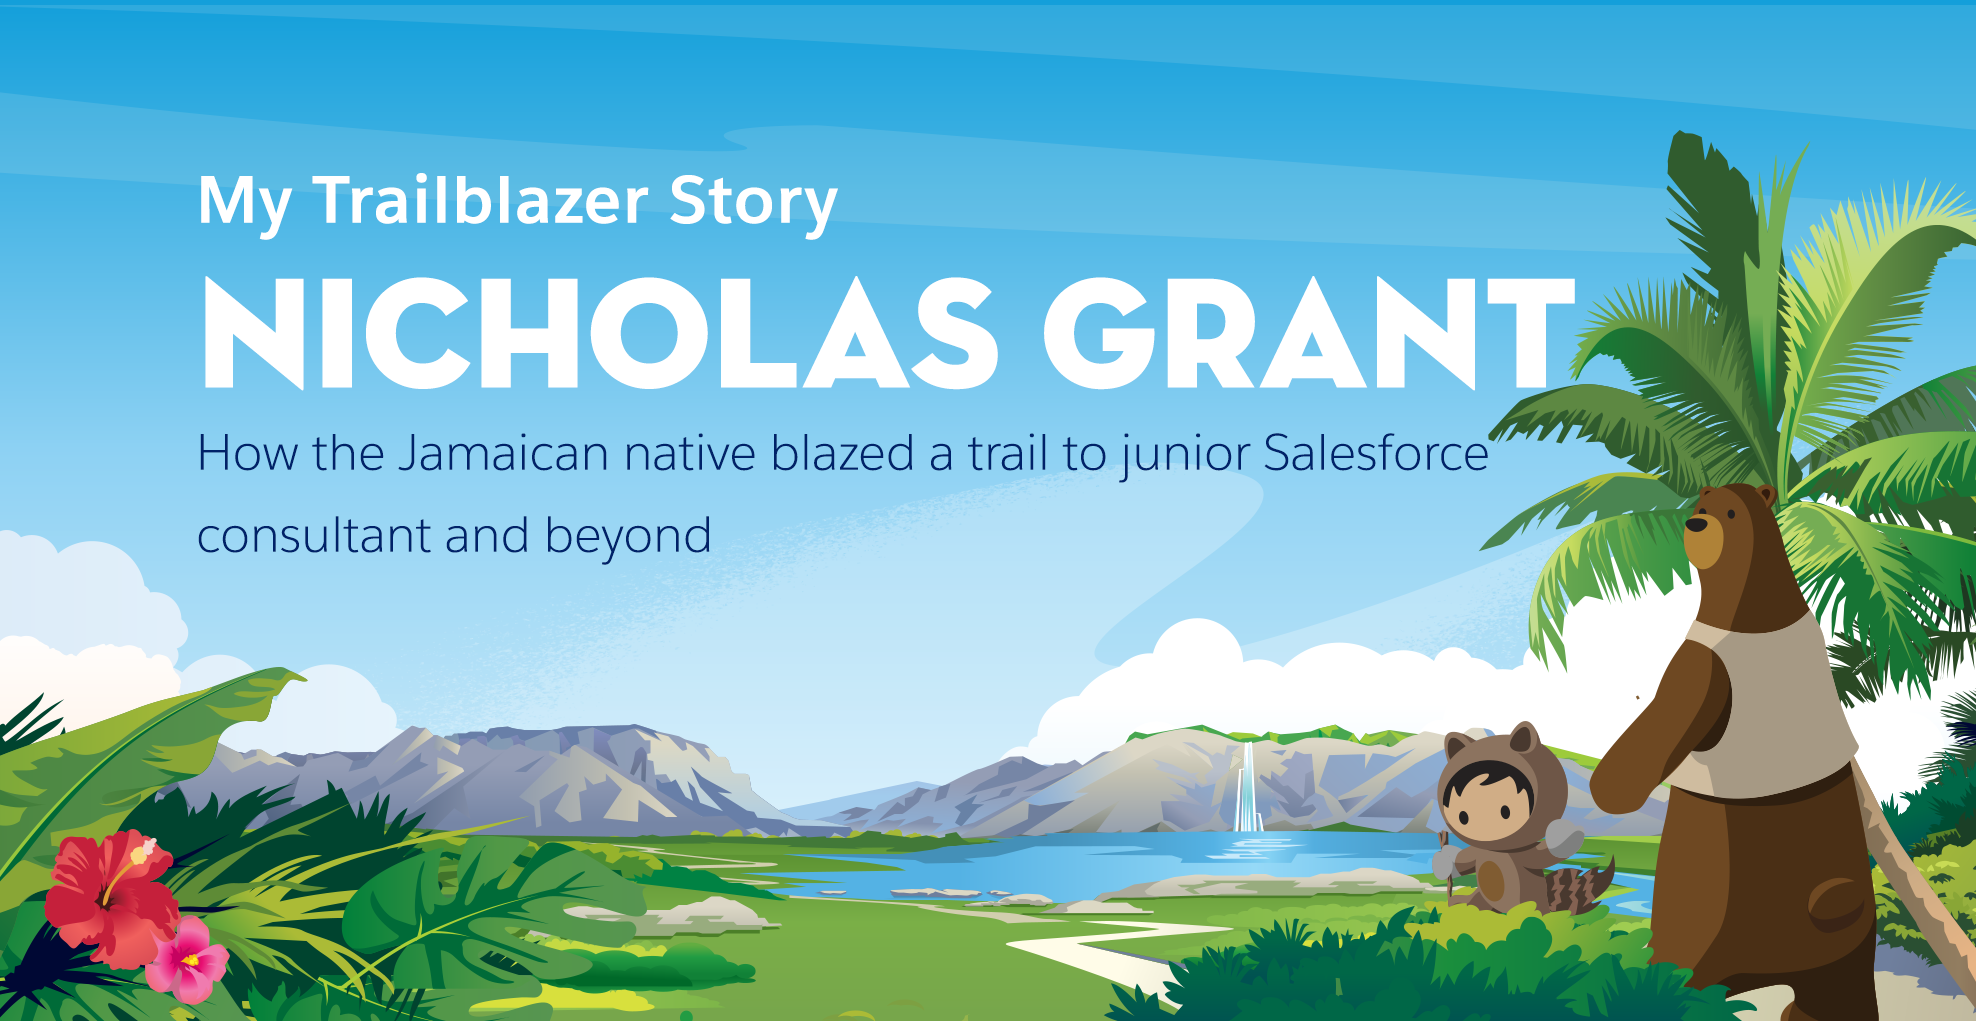 My Trailblazer Story: "I've Just Got to Be Outstanding"